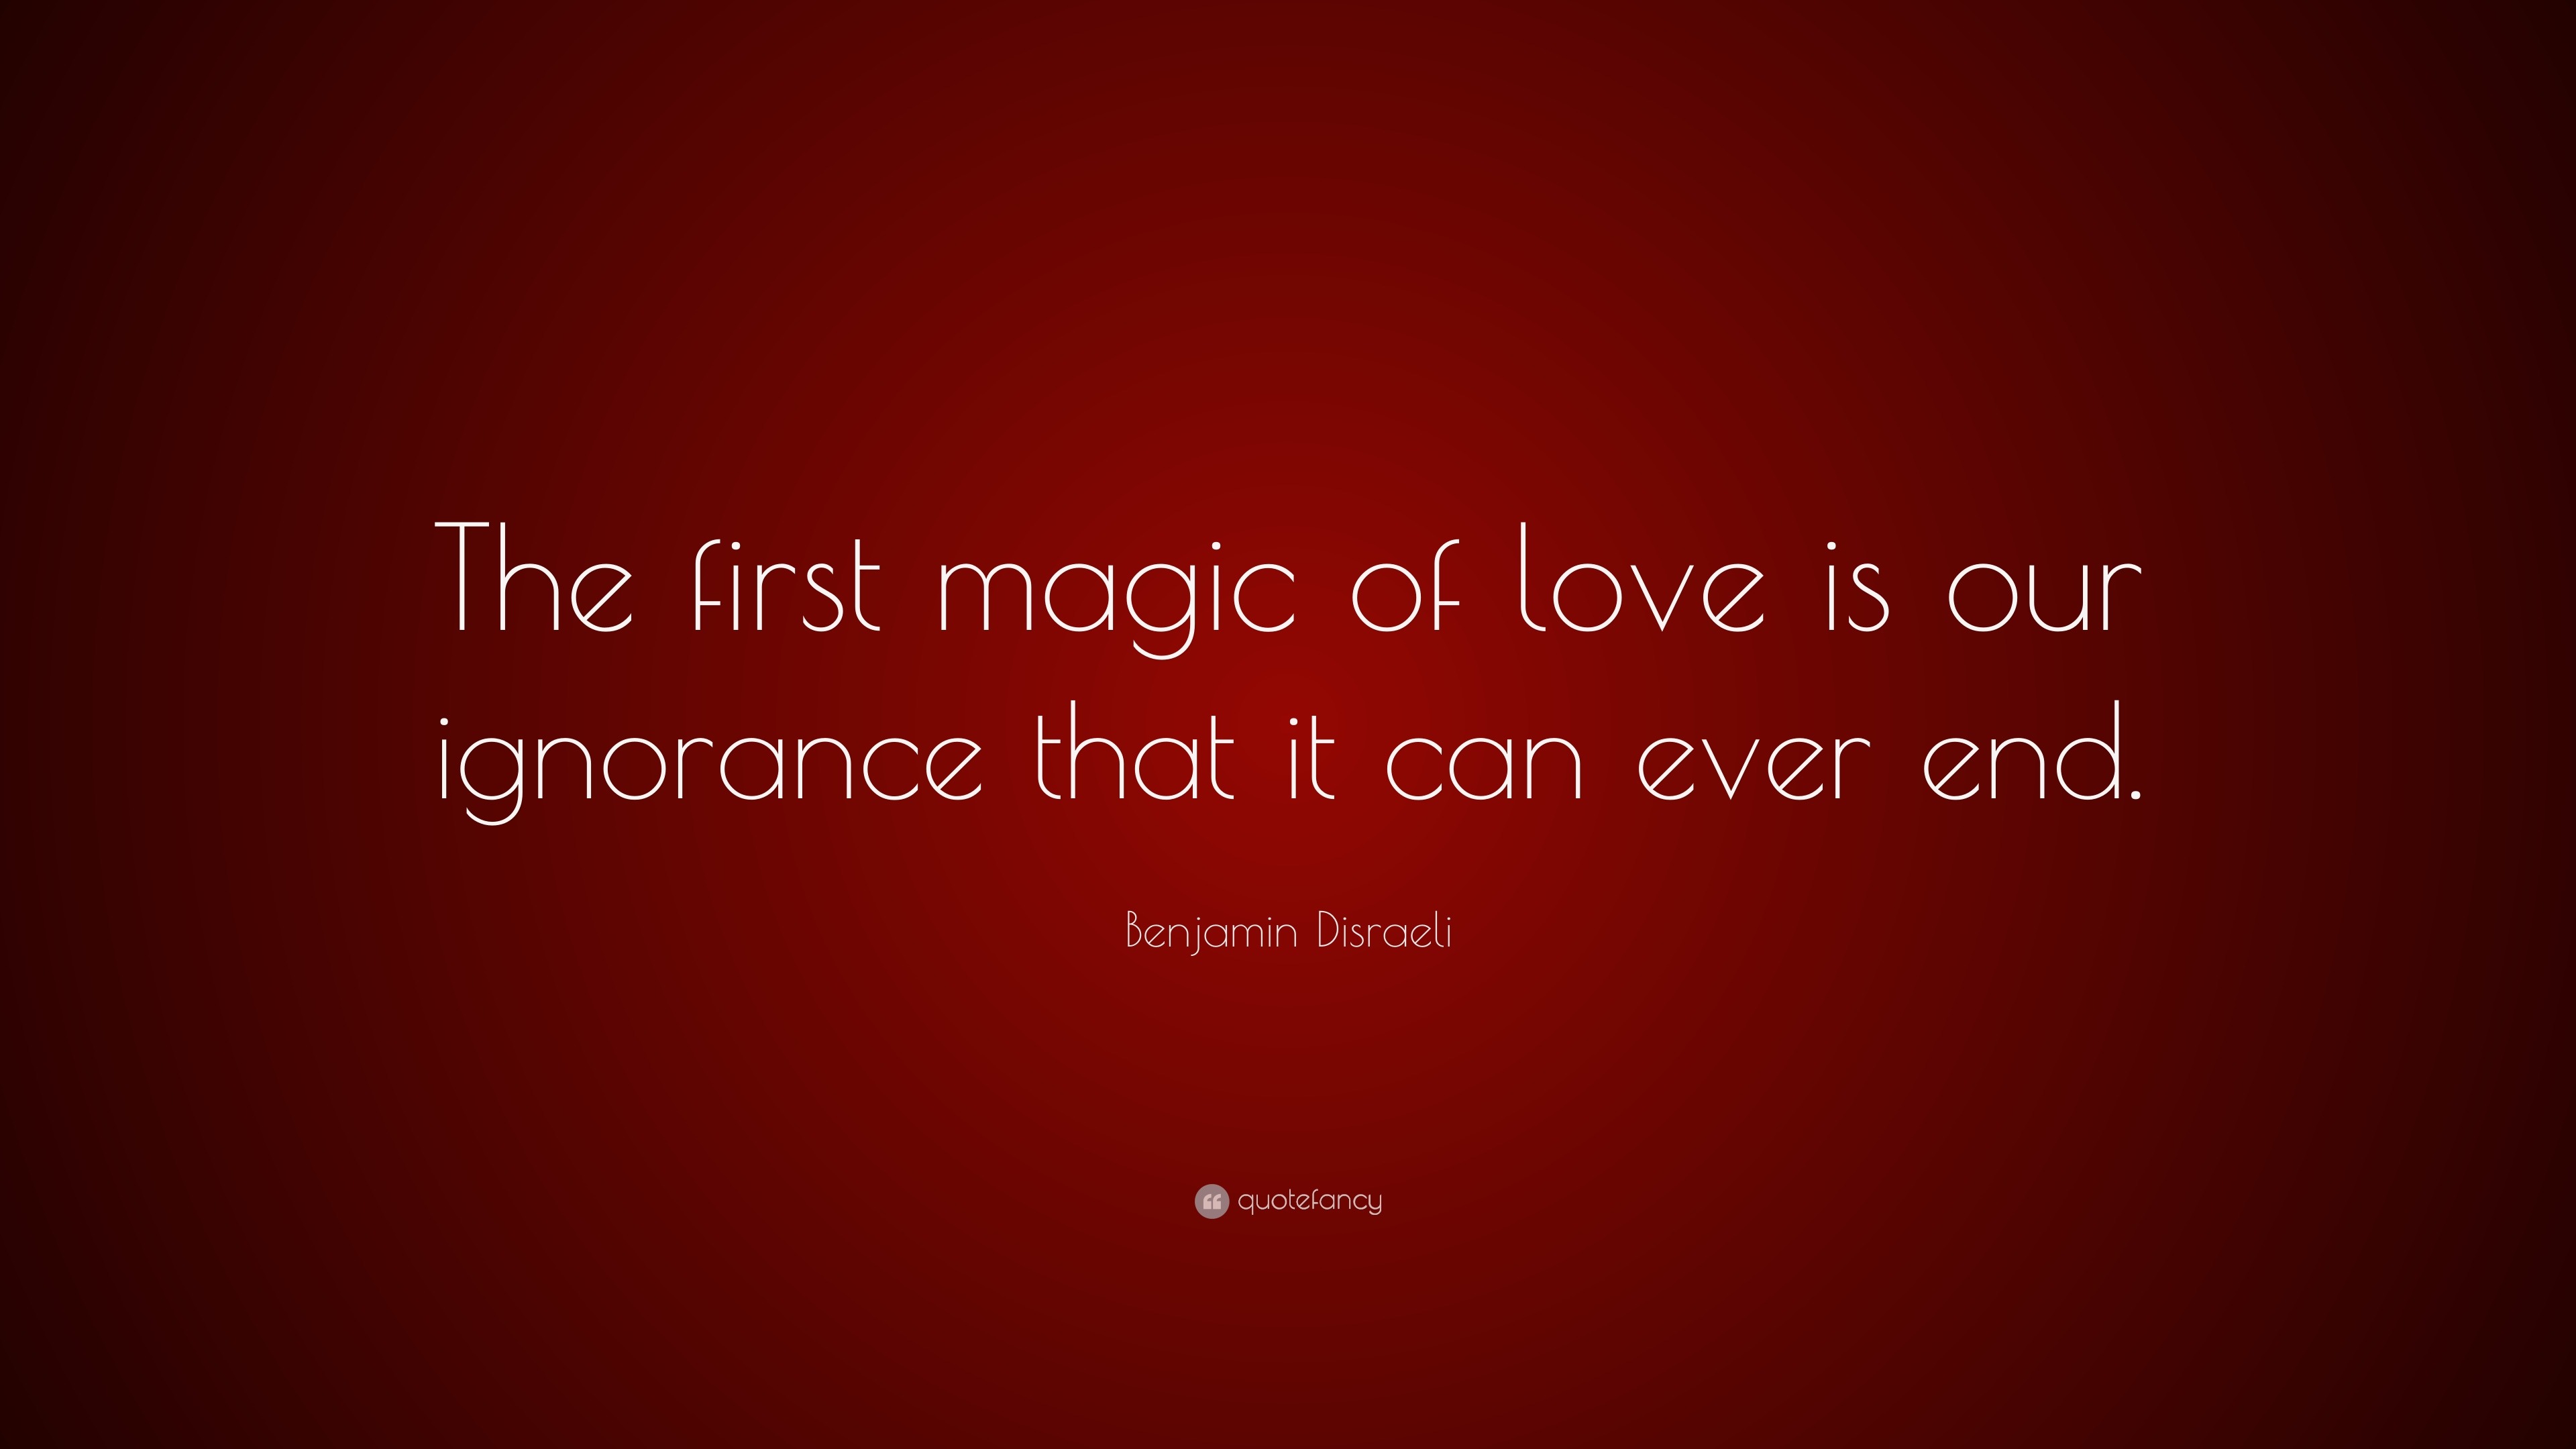 Broken Heart Quotes “The first magic of love is our ignorance that it can